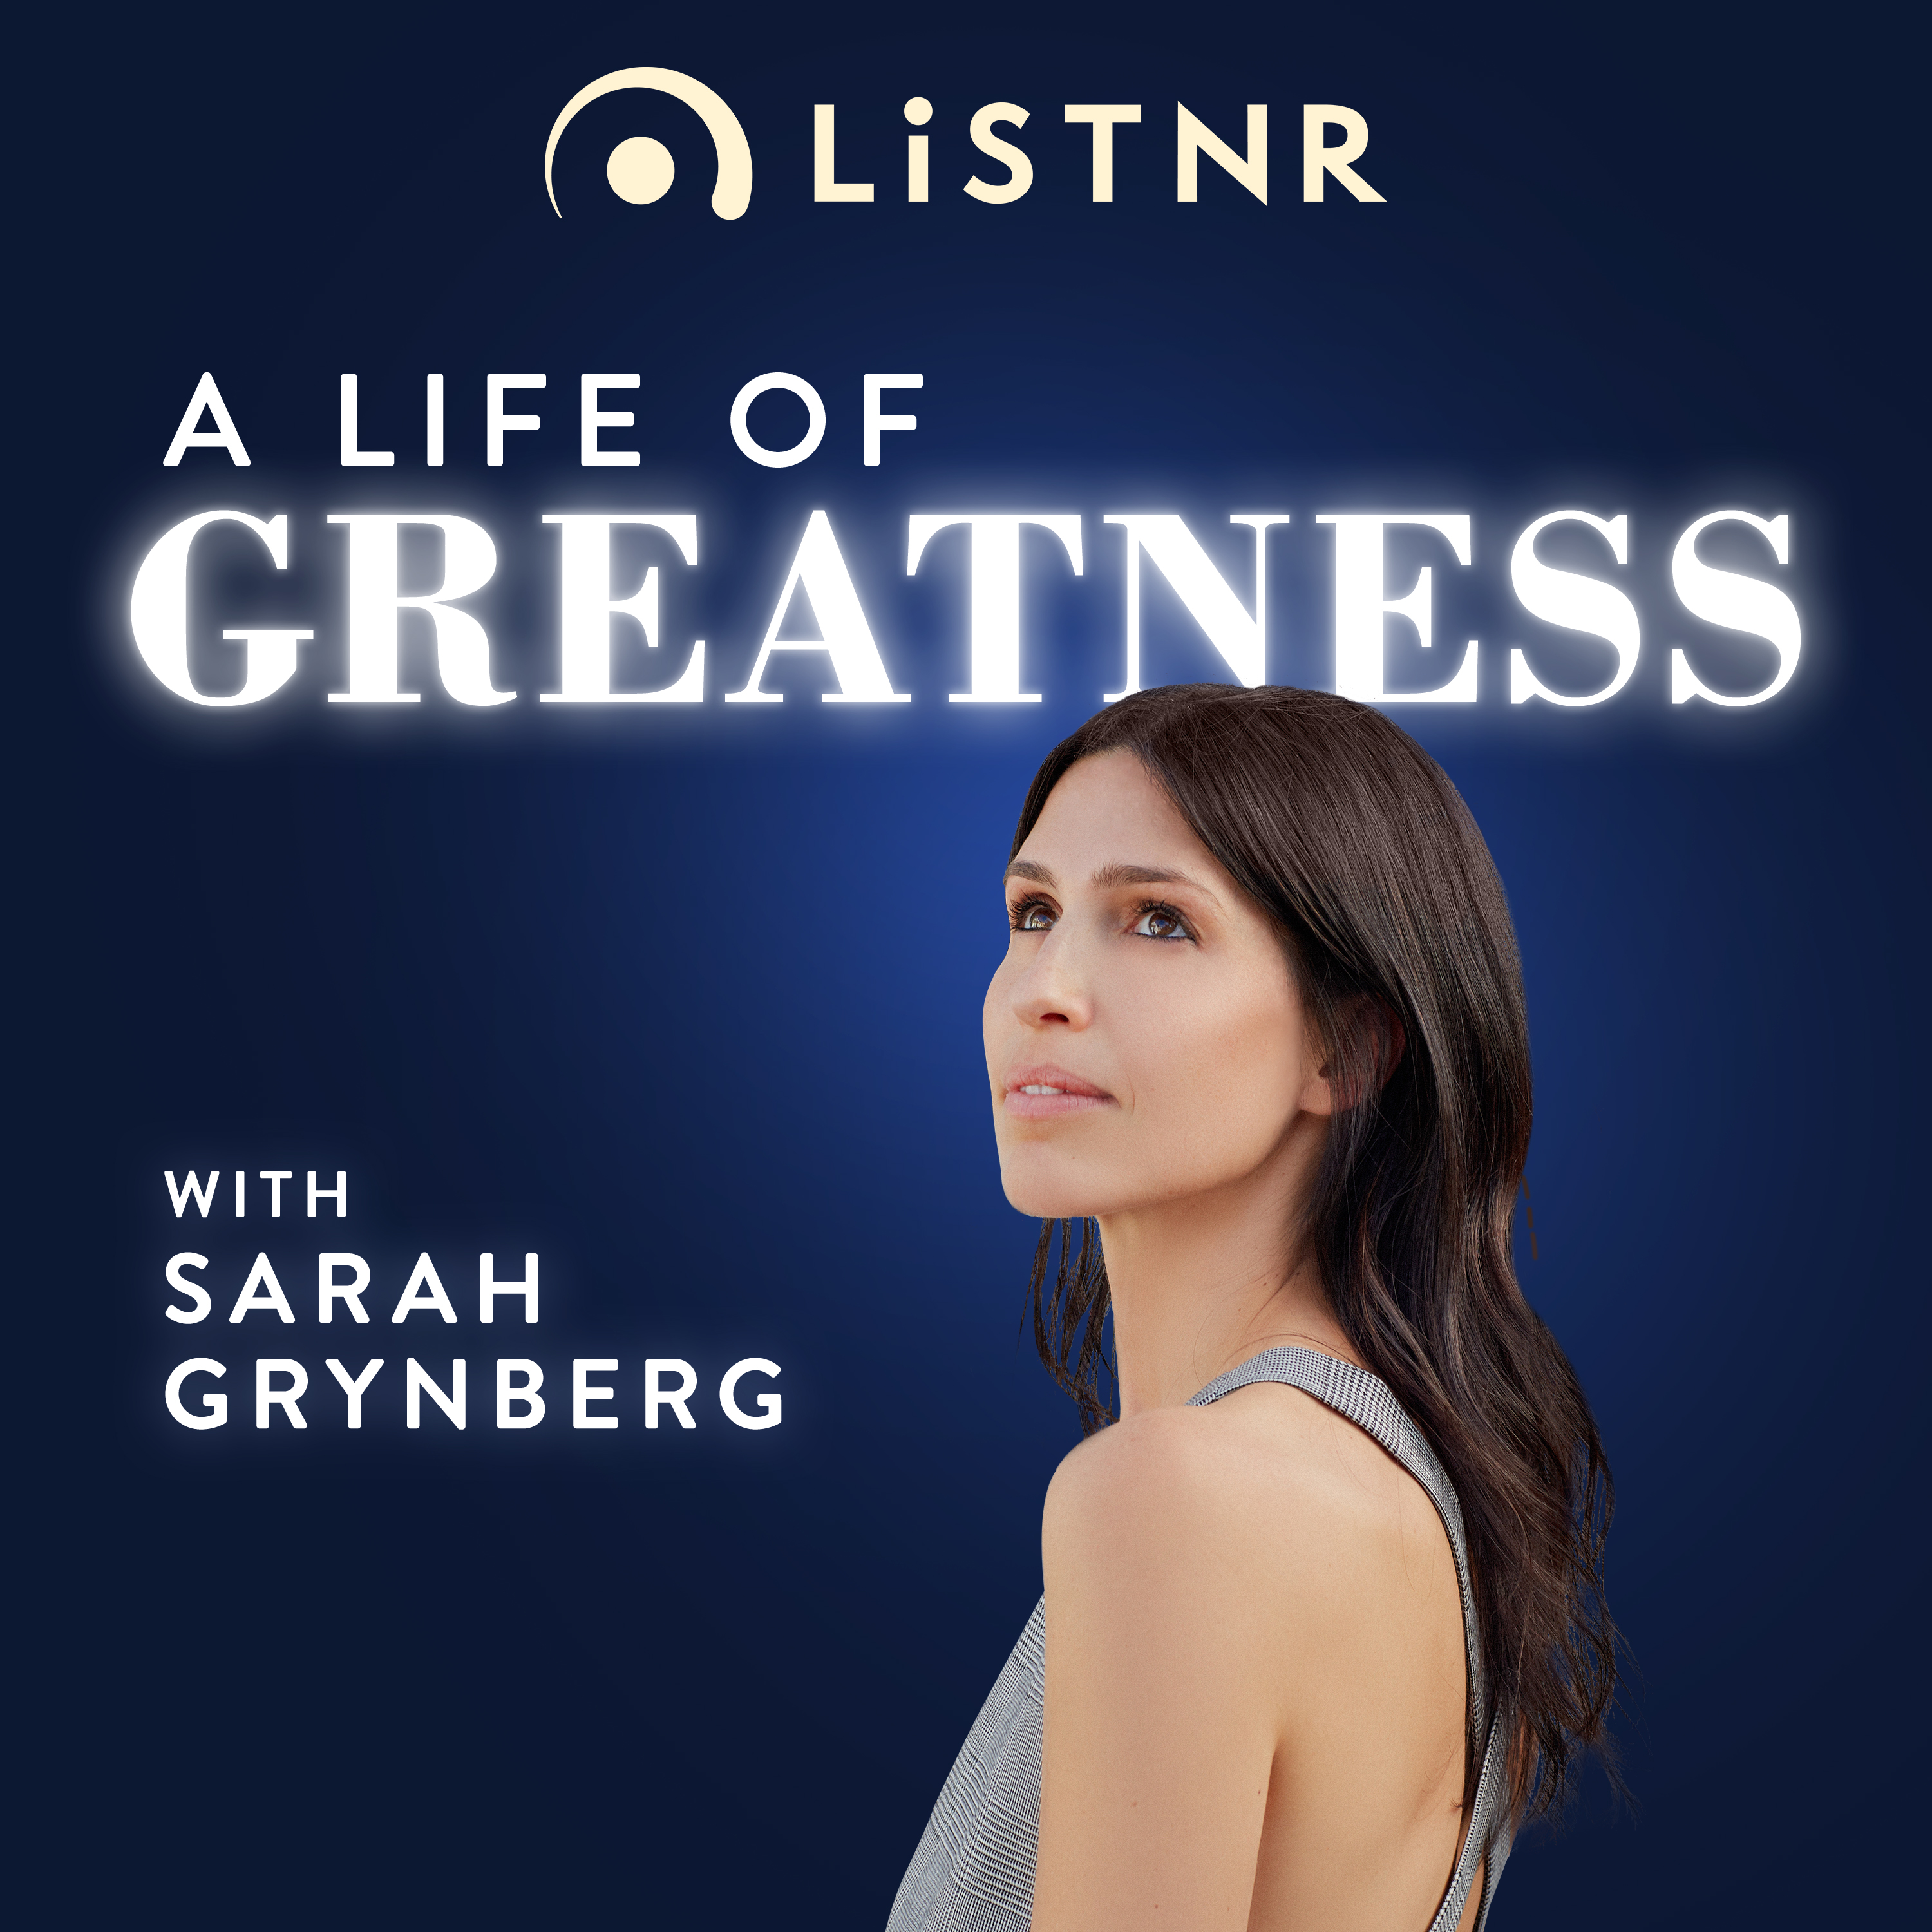 Sarah's Greatness: "I'm unsatisfied with my career"